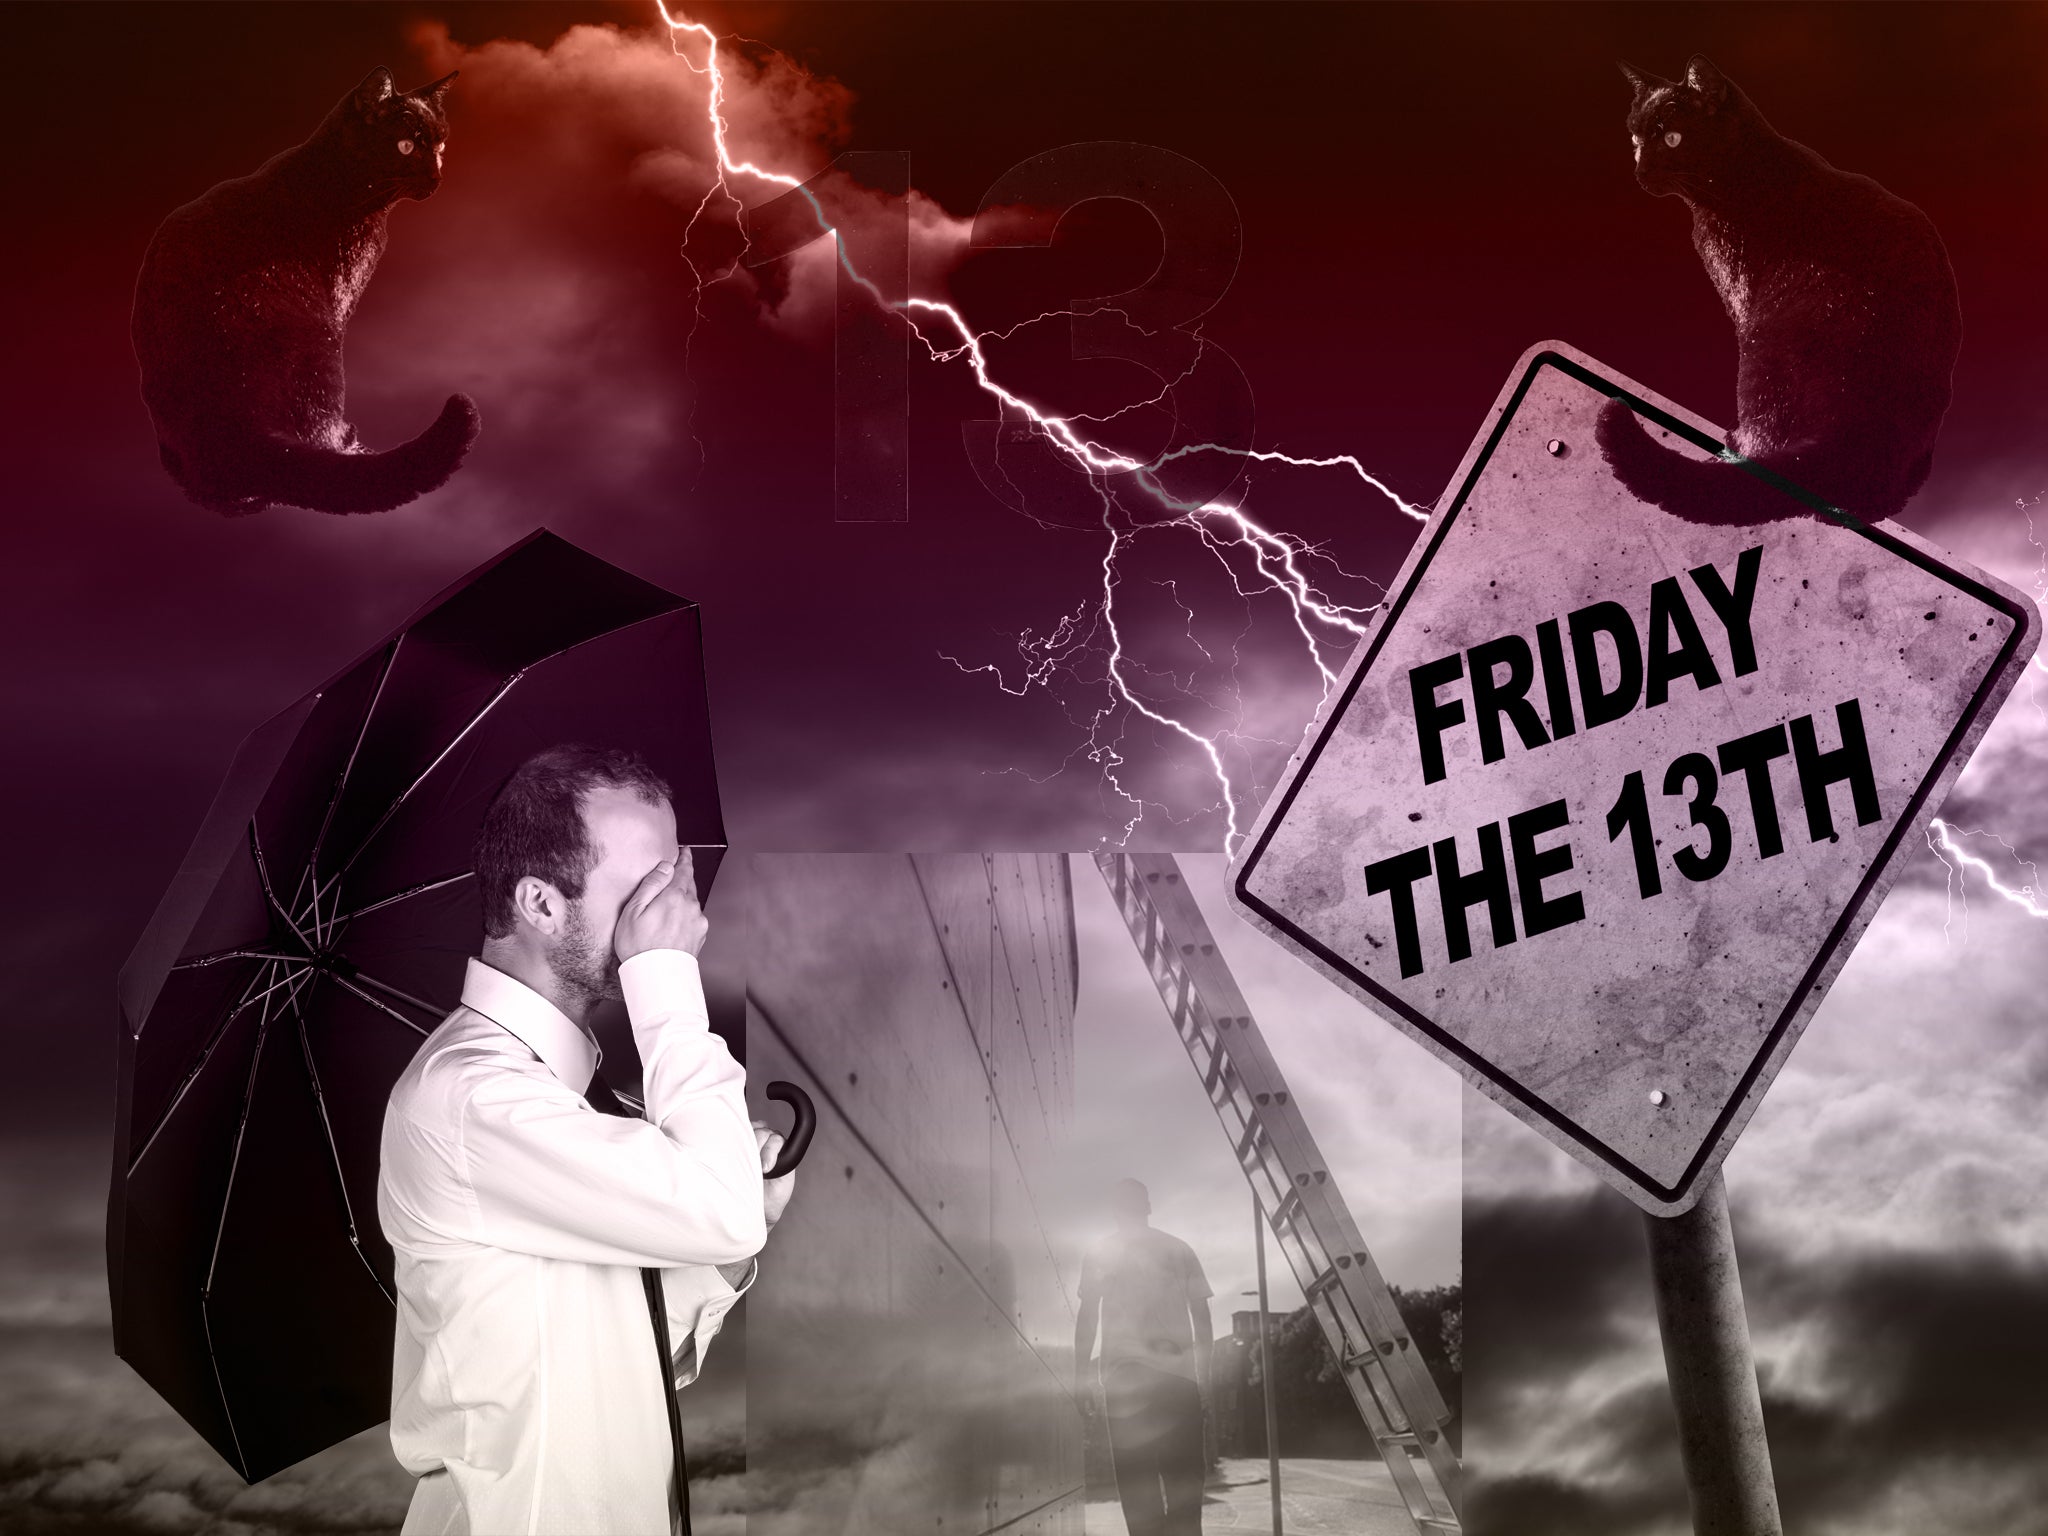 Should we stay home on Friday the 13th to avoid accidents?